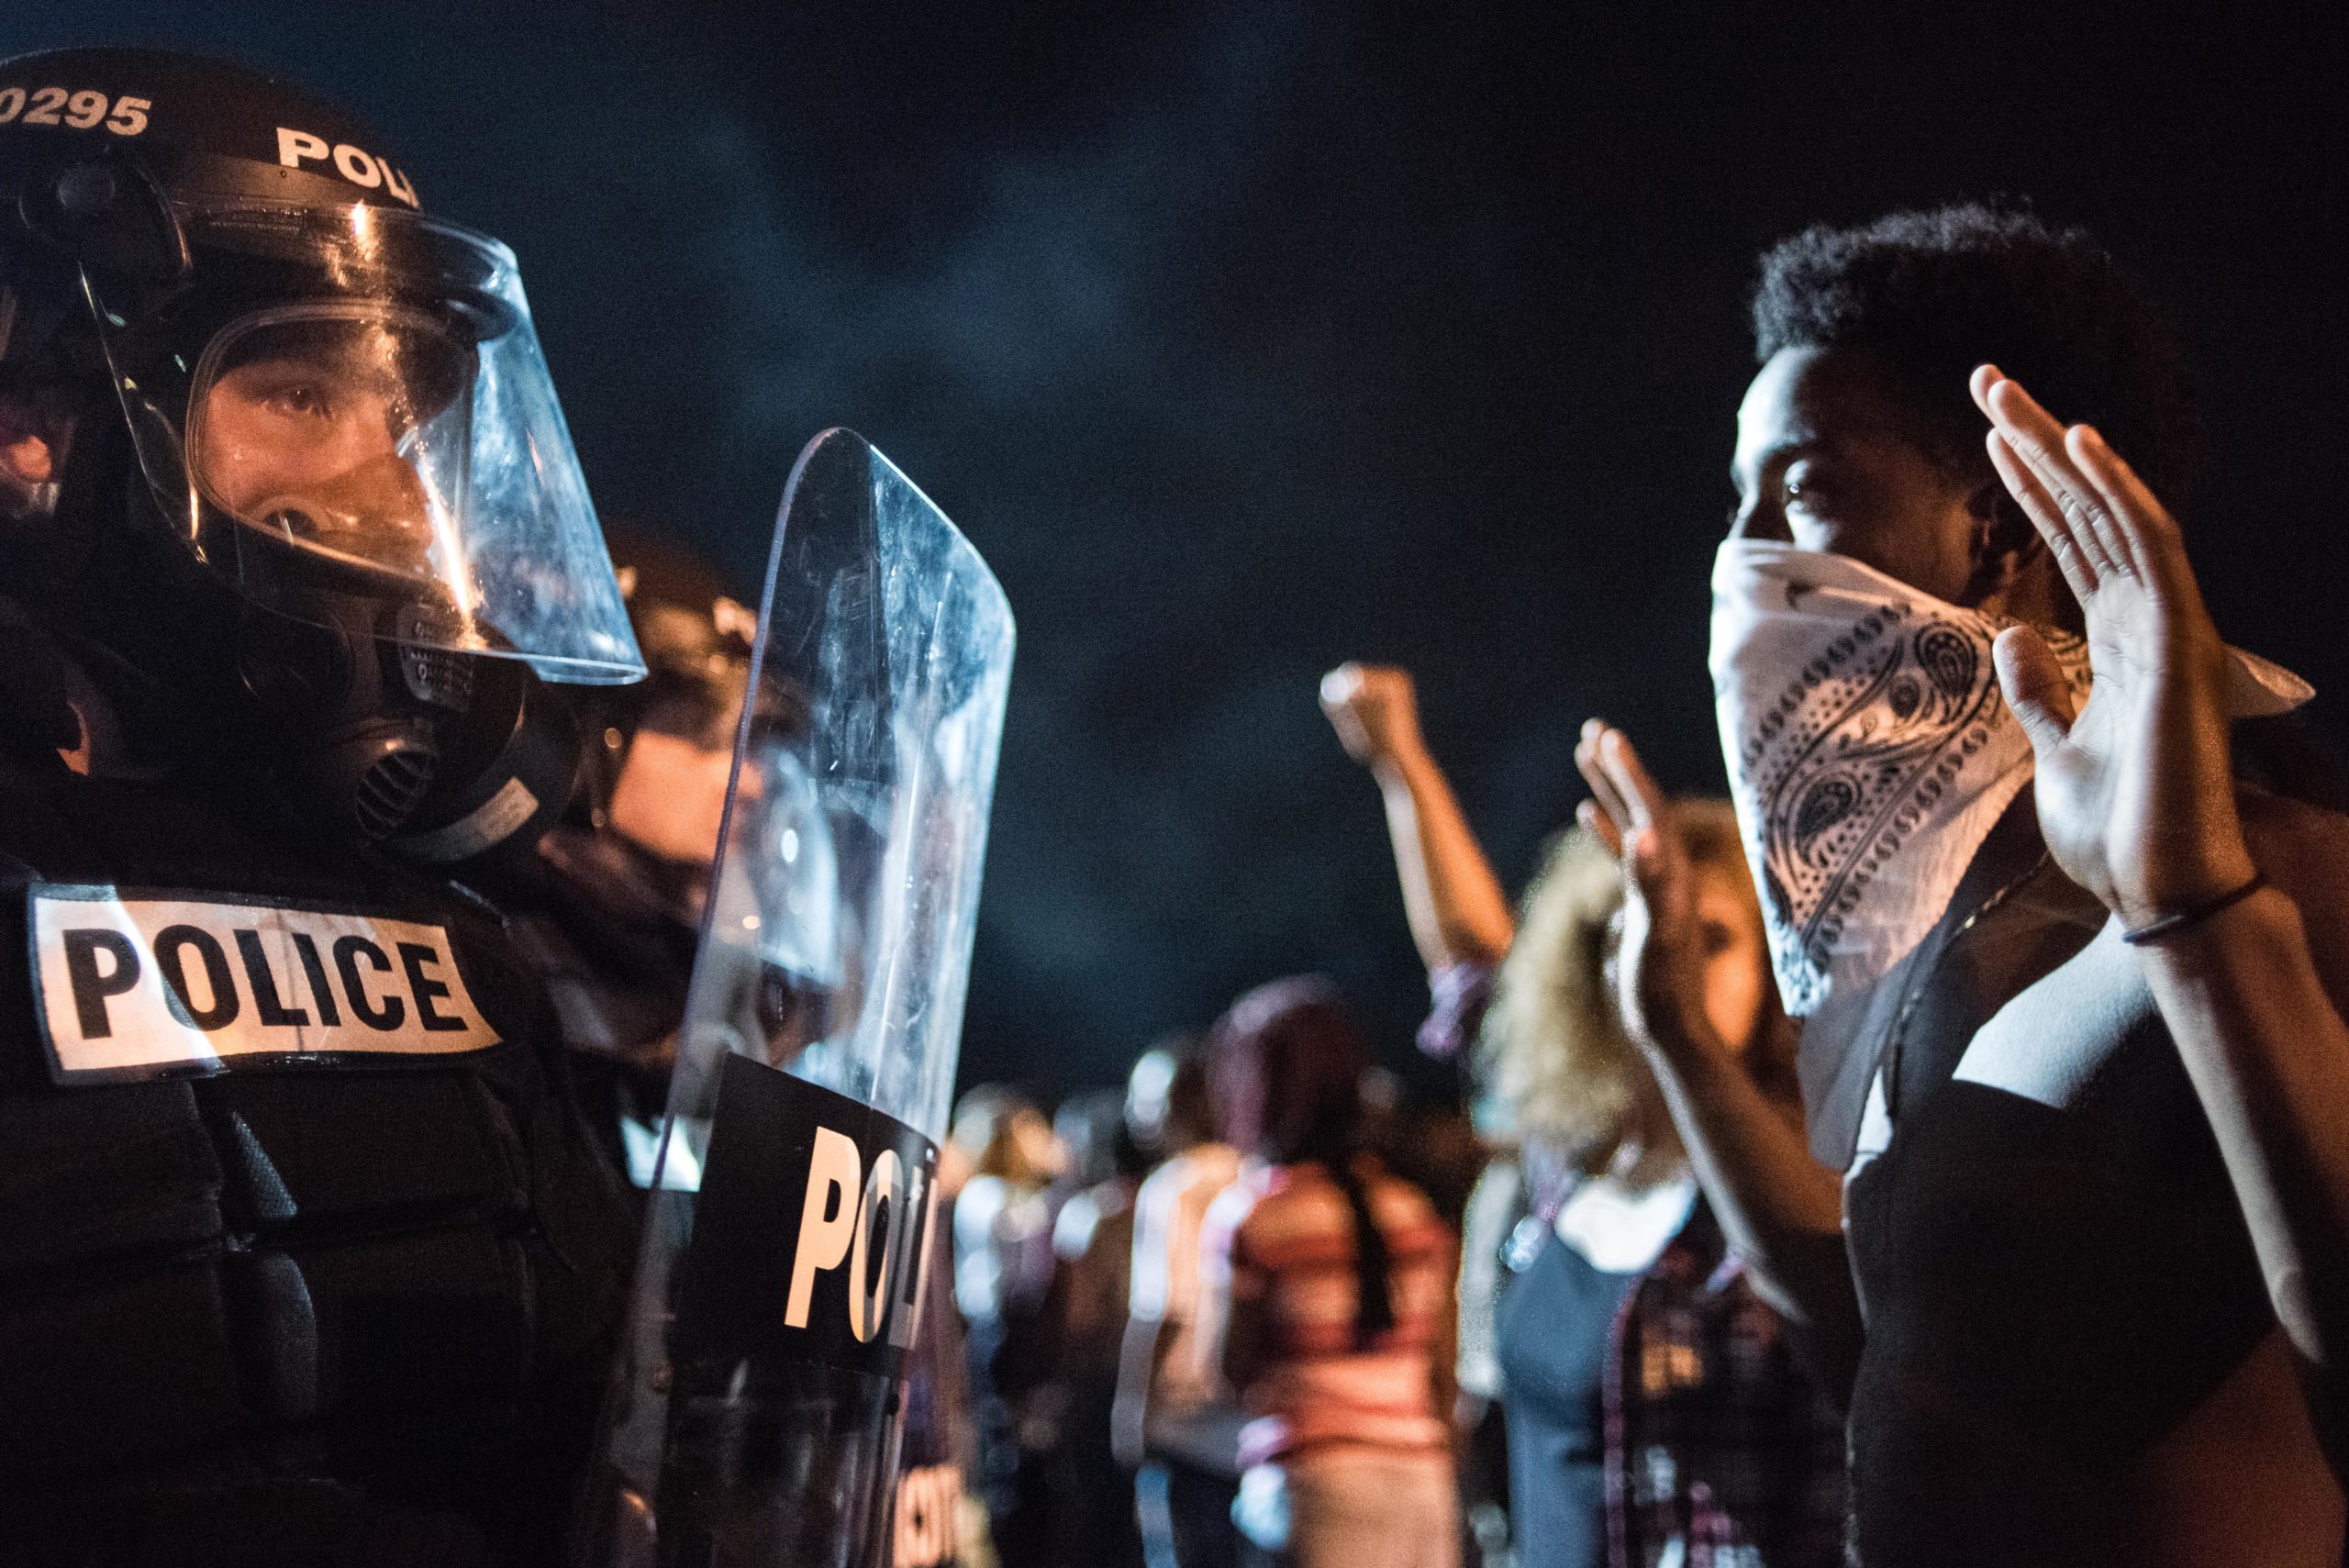 CHARLOTTE, NC - SEPTEMBER 21: Police officers face off with protesters on the I-85 (Interstate 85) during protests in the early hours of September 21, 2016 in Charlotte, North Carolina. The protests began last night, following the fatal shooting of 43-year-old Keith Lamont Scott by a police officer at an apartment complex near UNC Charlotte. (Photo by Sean Rayford/Getty Images)